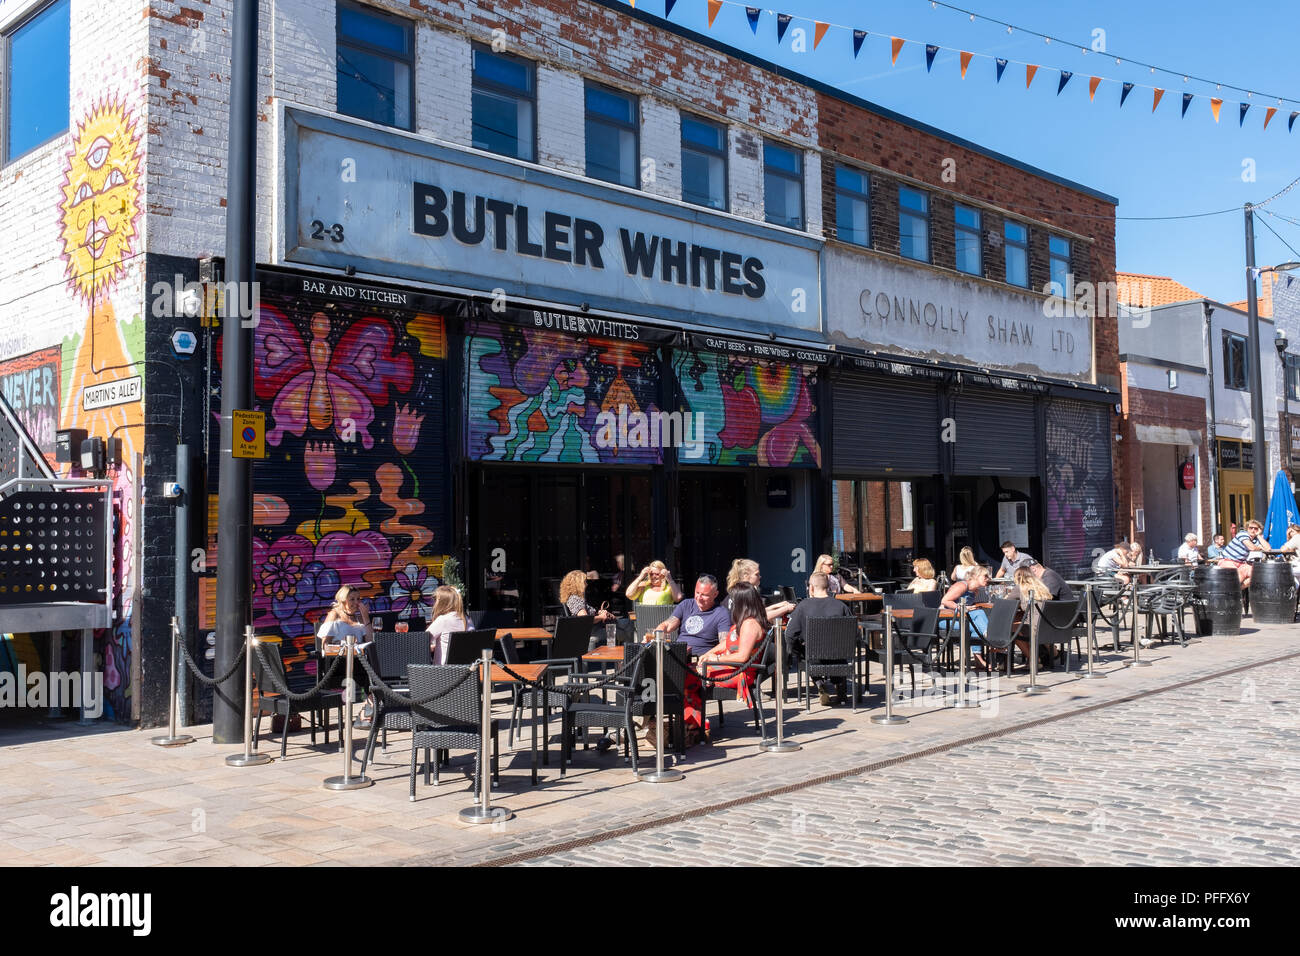 Image of Kingston Upon Hull UK City of Culture 2017. Shown in the fruit market region is Butler Whites people enjoying a drink outside in the sun. Stock Photo